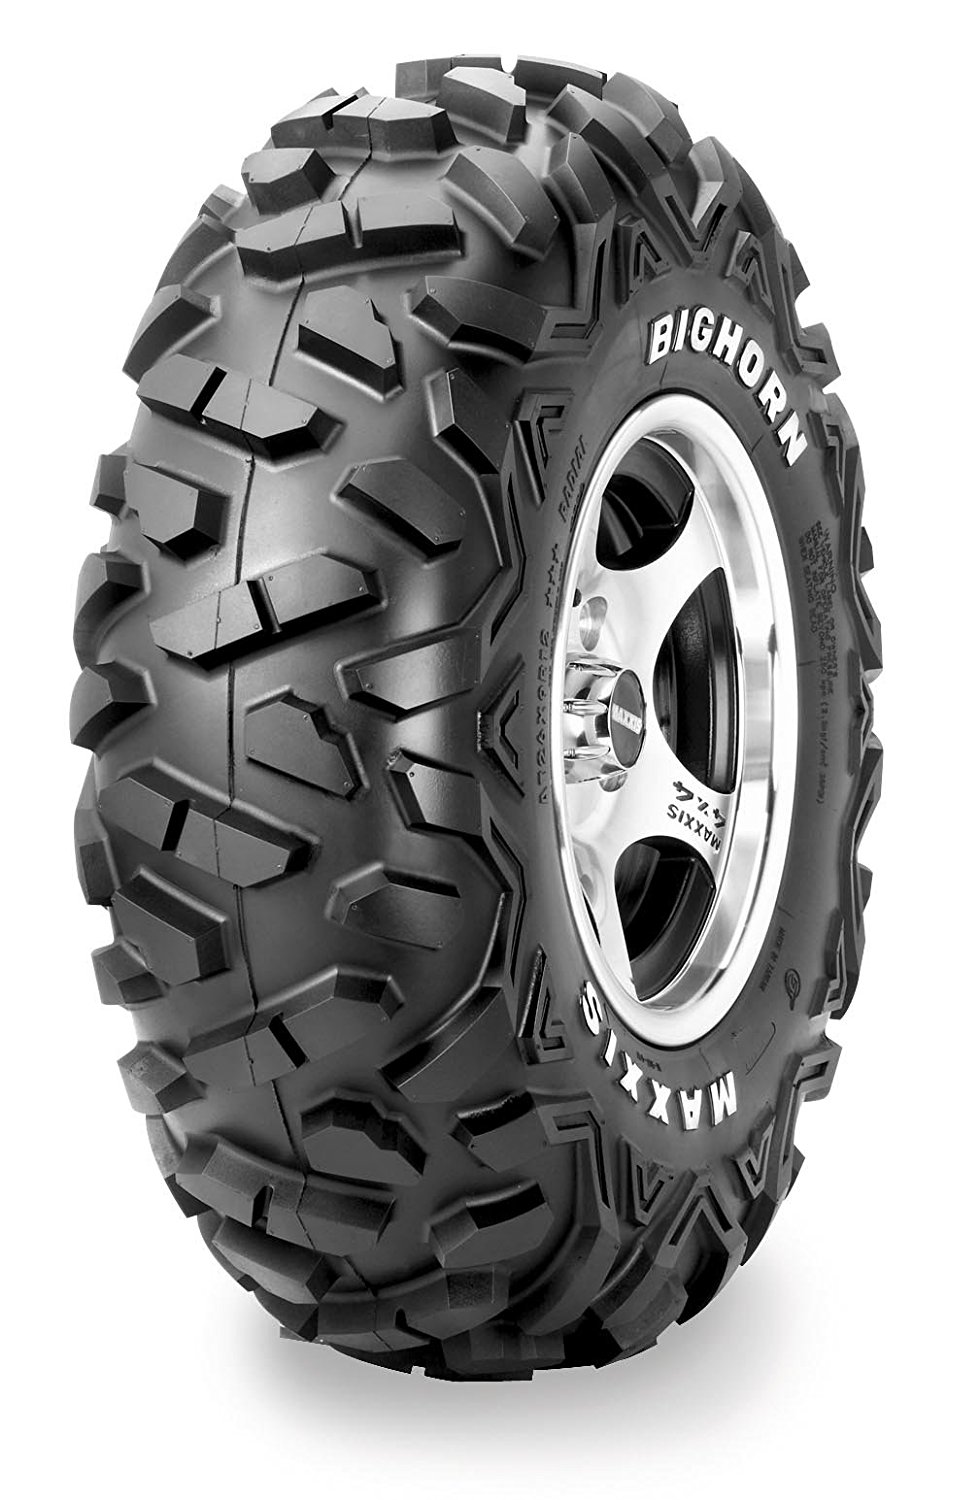 Gomme Nuove Maxxis 27/9 R12 52N BIG HORN M-917 pneumatici nuovi Estivo